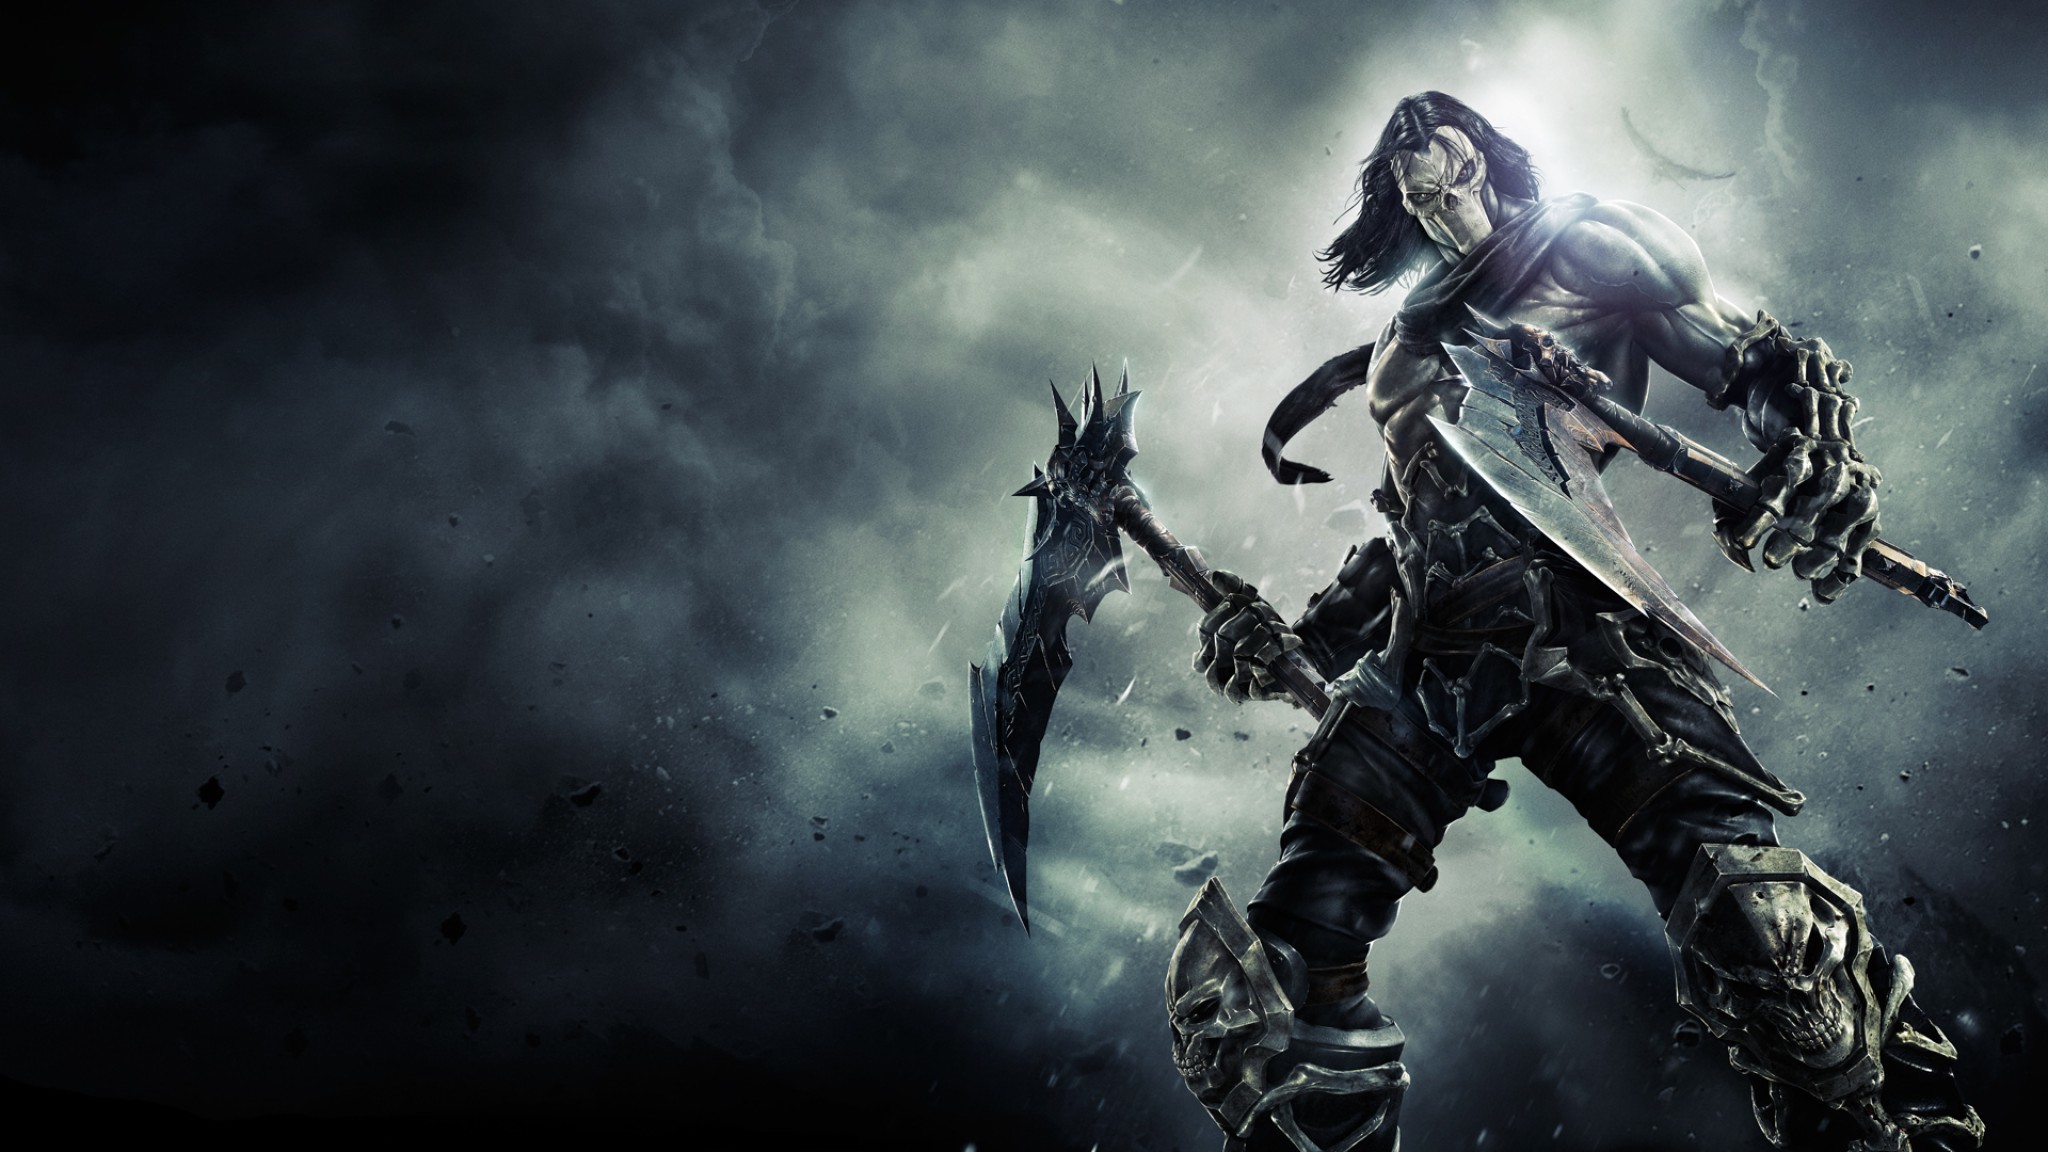 2048x1152 wallpaper Darksiders Death Games 3D Animated Character Wallpaper . ...